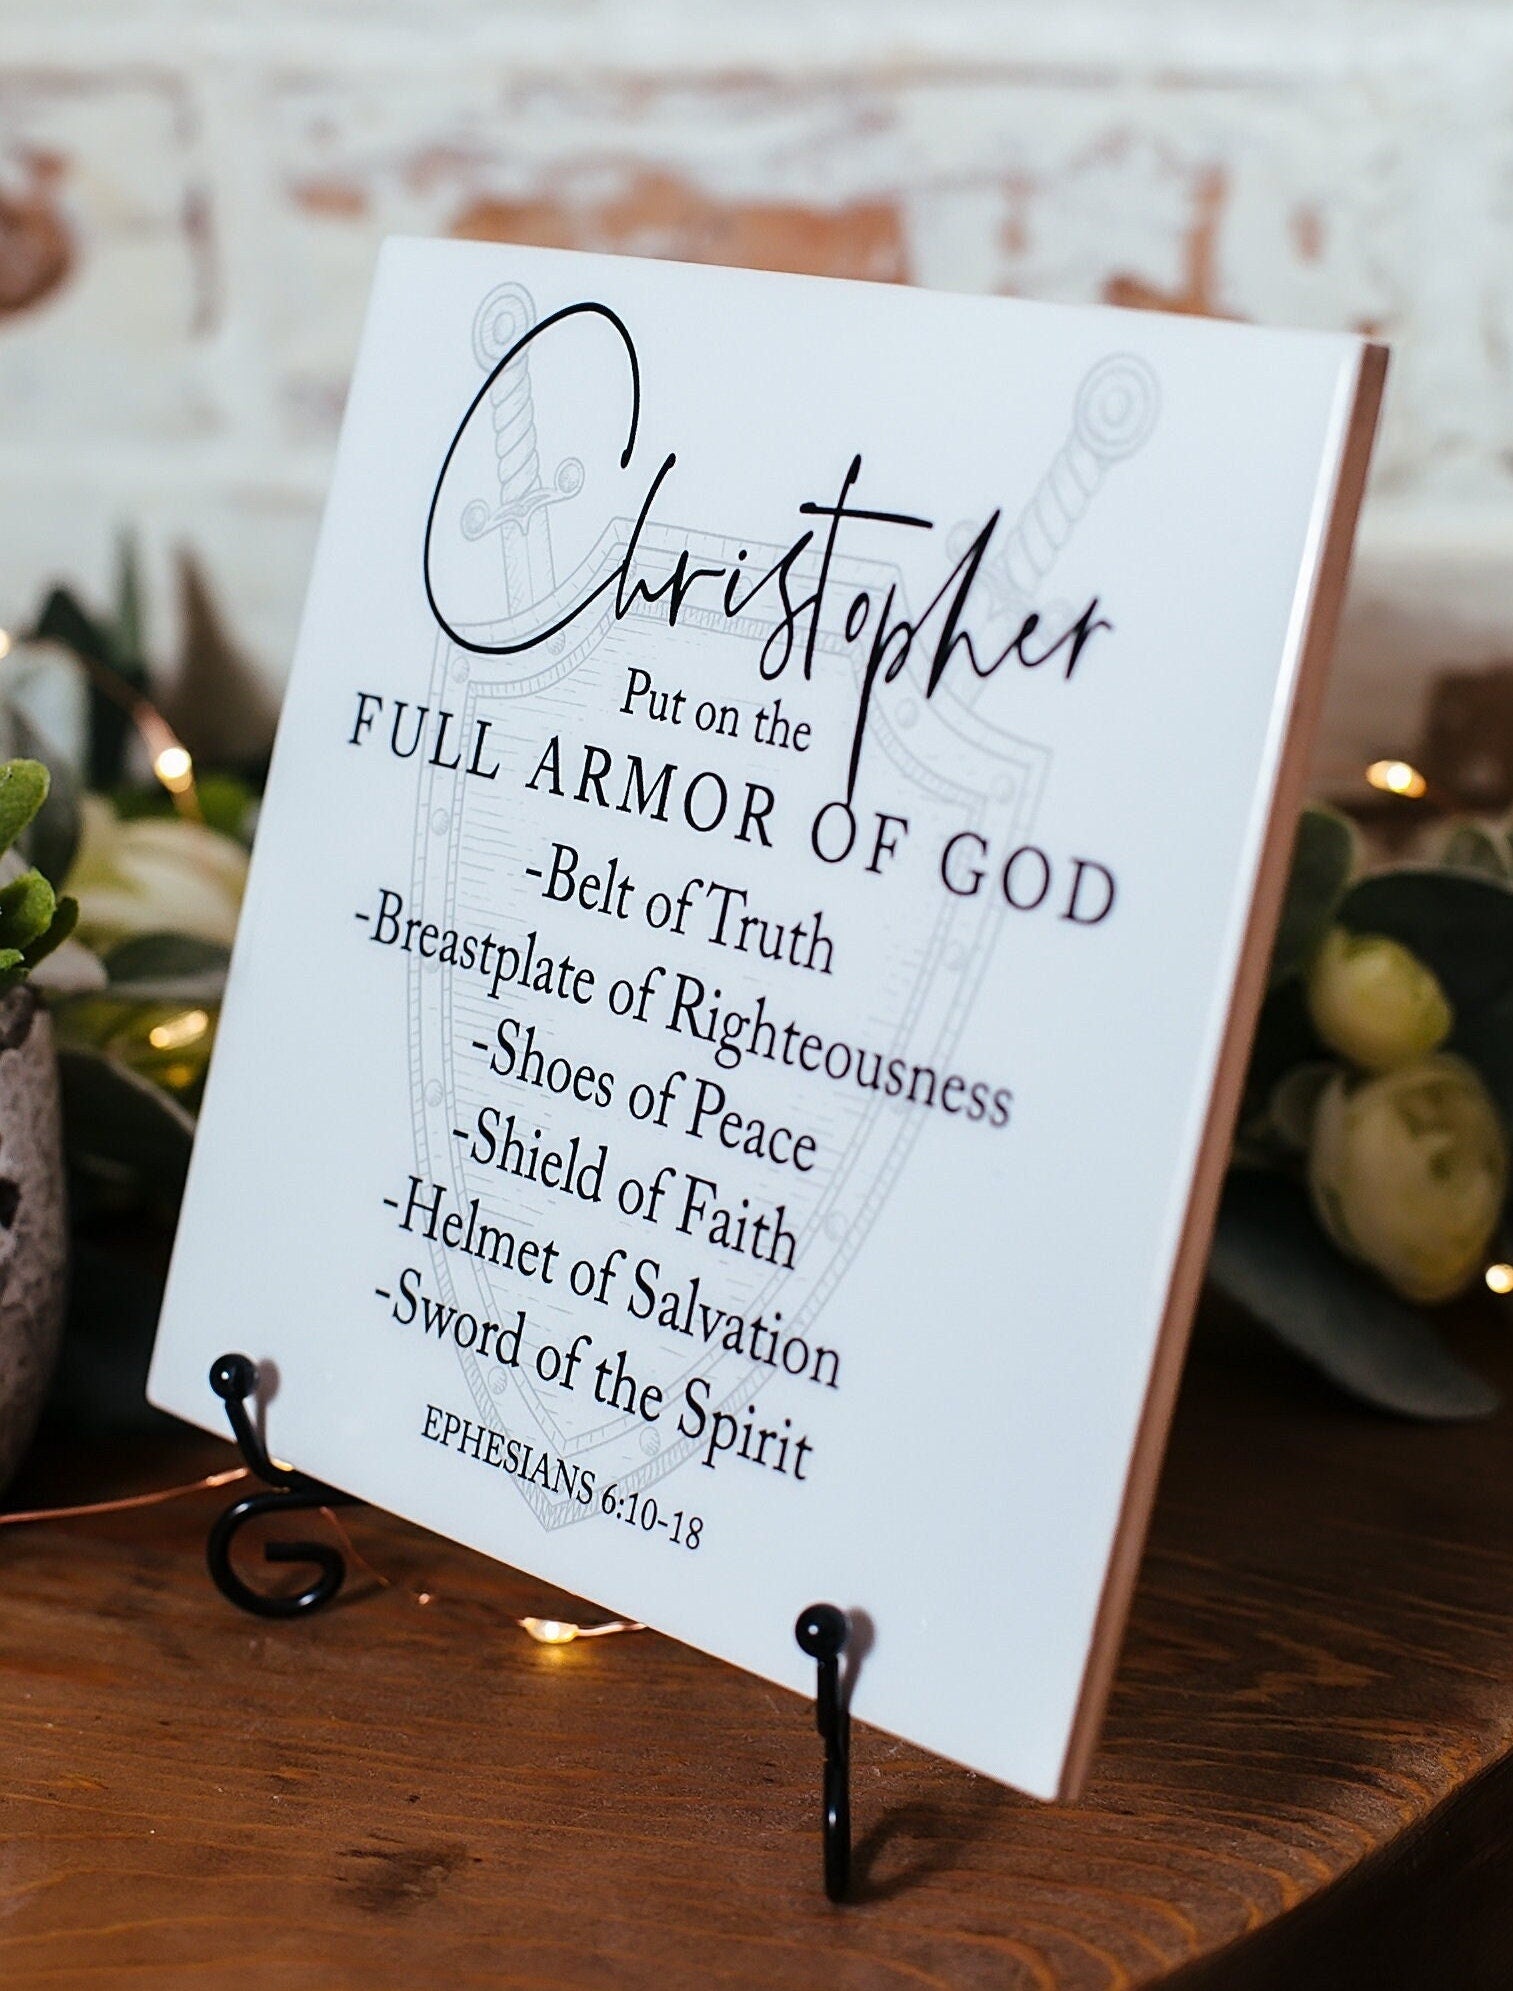 Put On The Full Armor Of God Personalized Christian Gifts for Men, Tee -  Pink Posies and Pearls